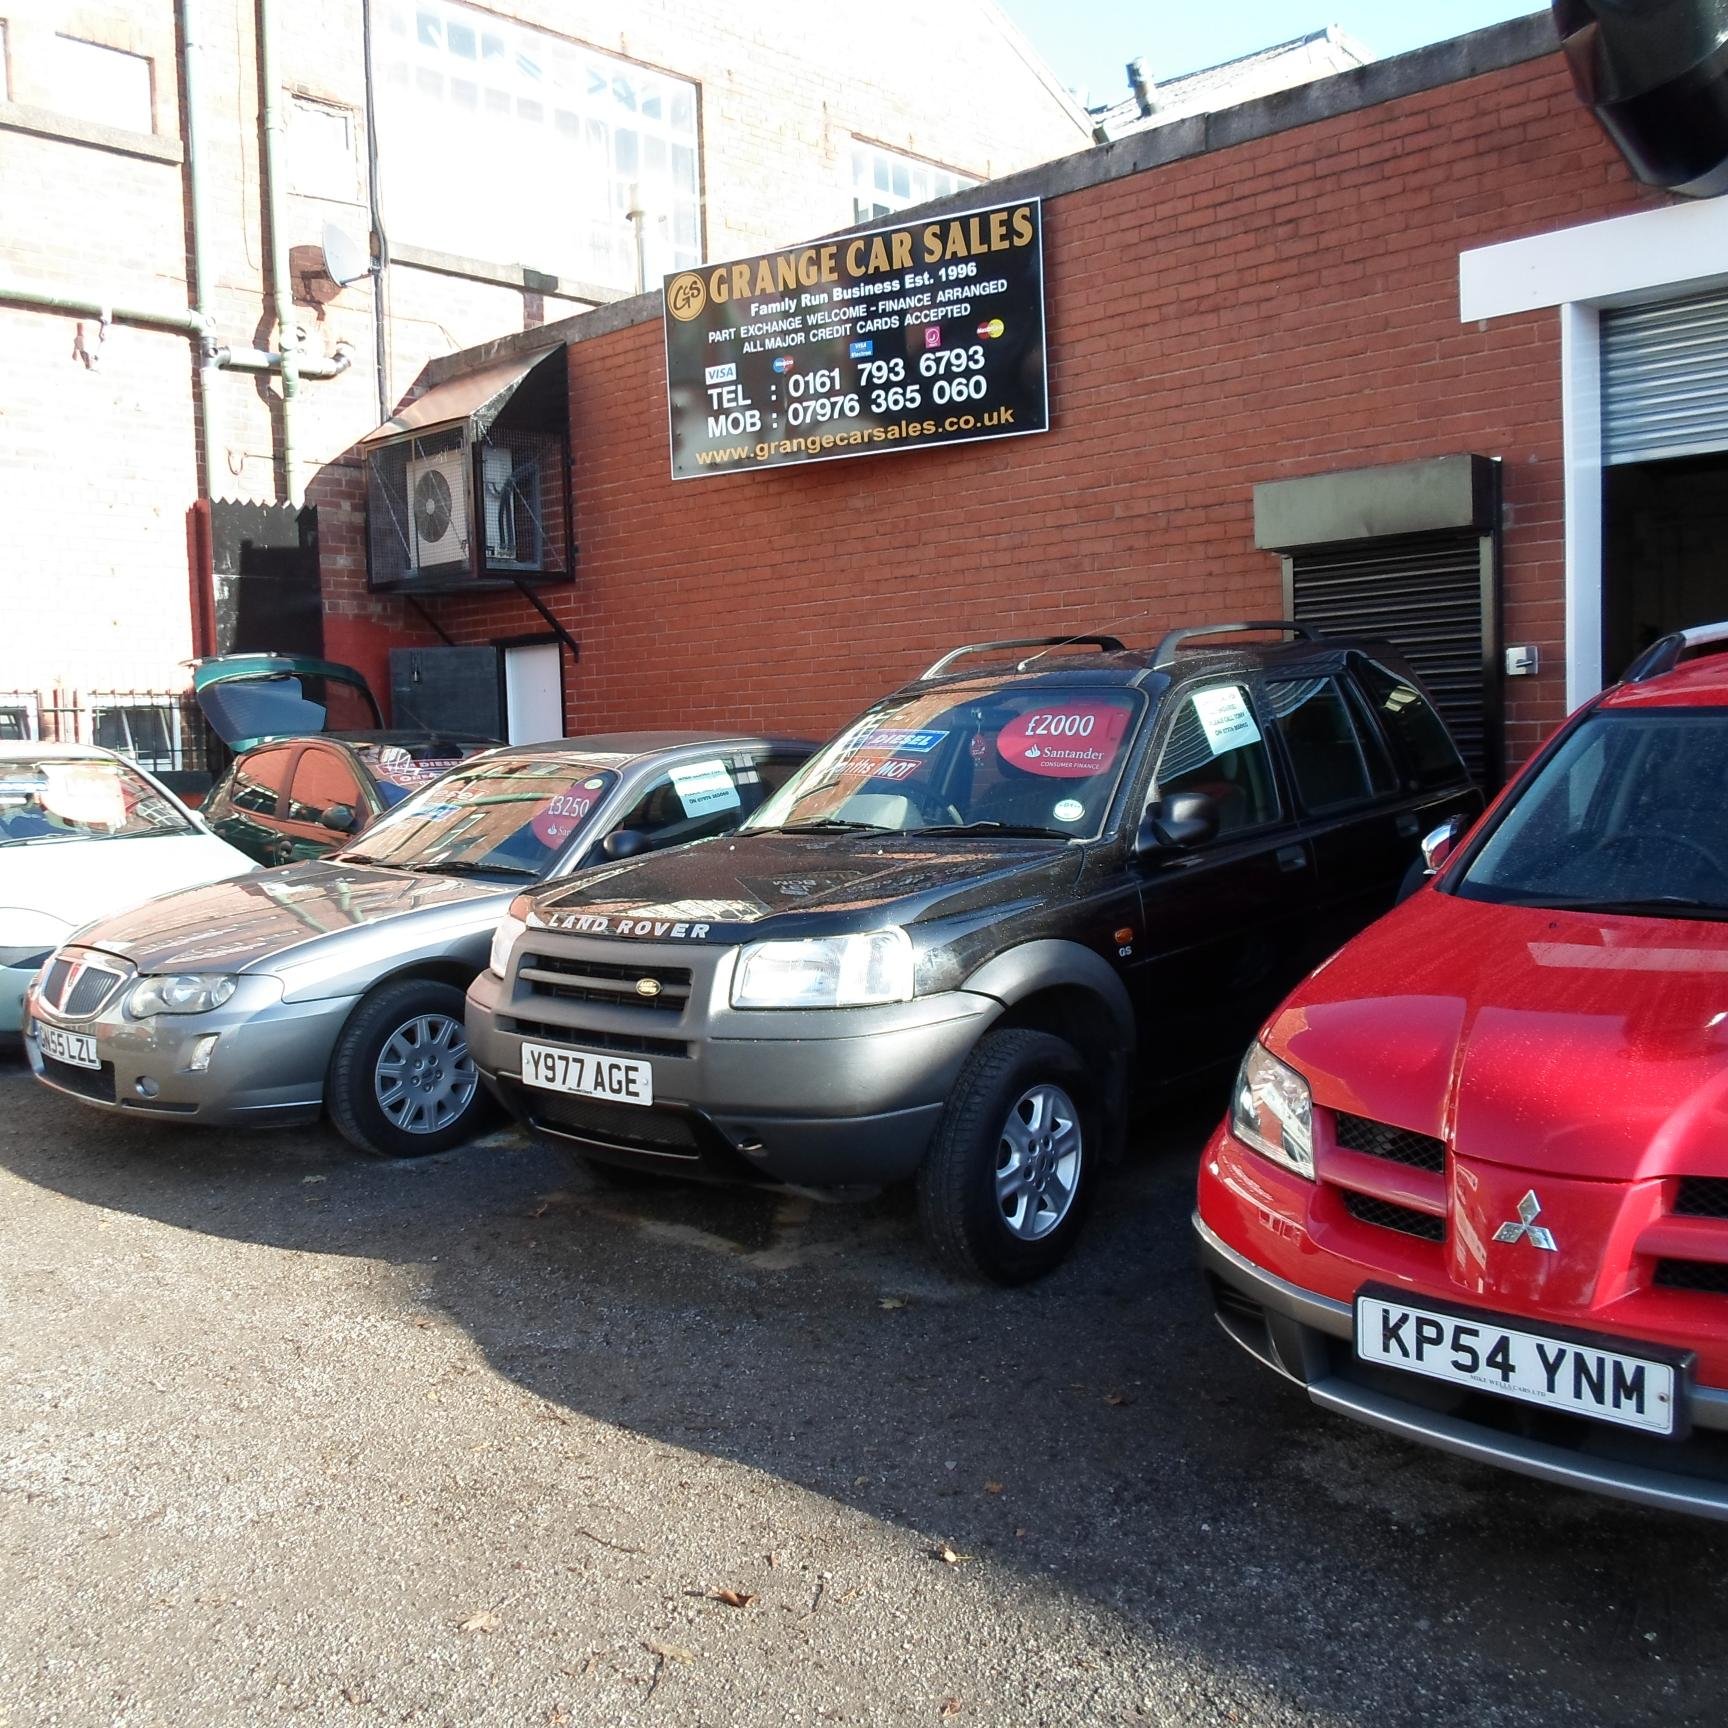 #GrangeCarSales are a family run #UsedCarDealer based in #Walkden #Worsley #Manchester #UsedCars #CarSales #CarForSale